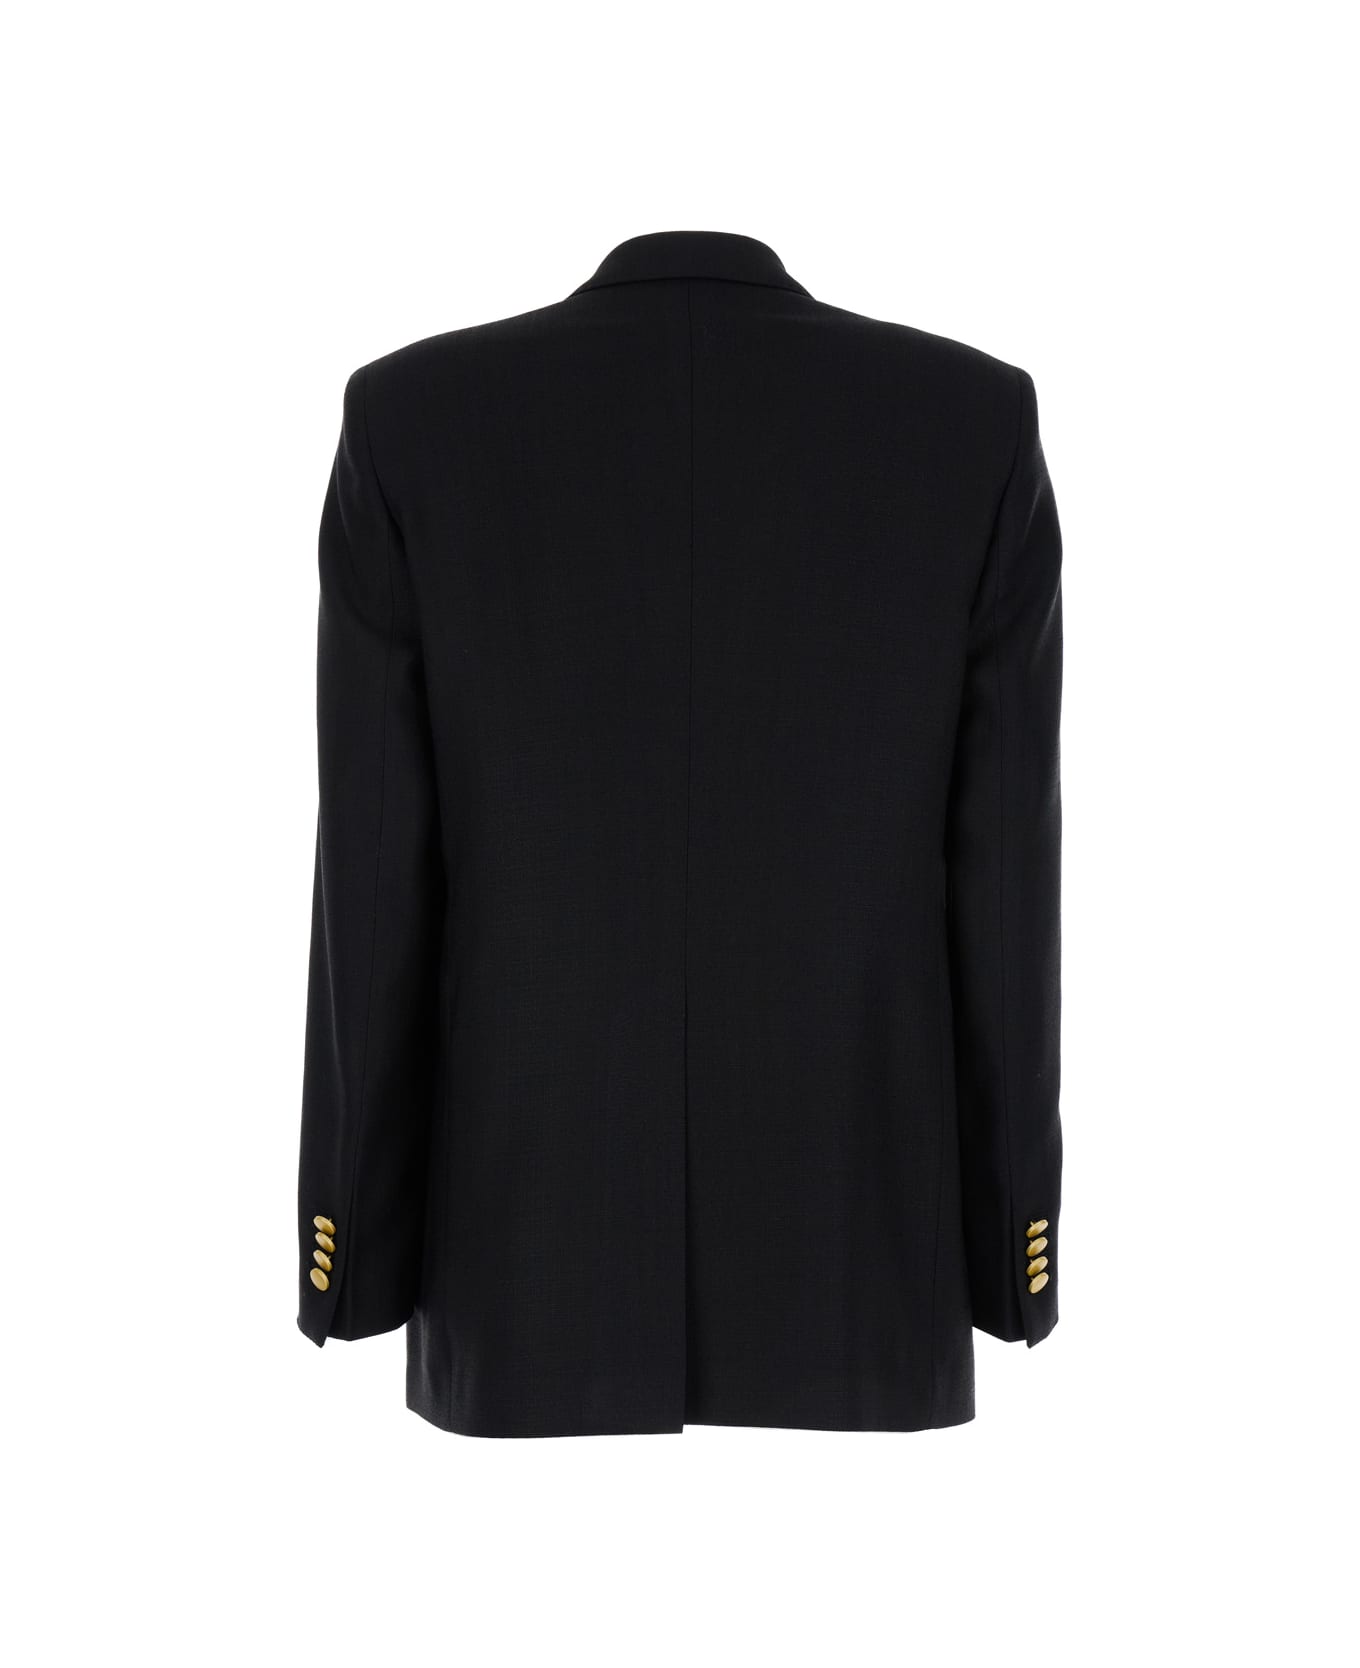 Tagliatore Black Double-breasted Blazer With Gold-tone Buttons In Viscose Blend Woman - Black ジャケット